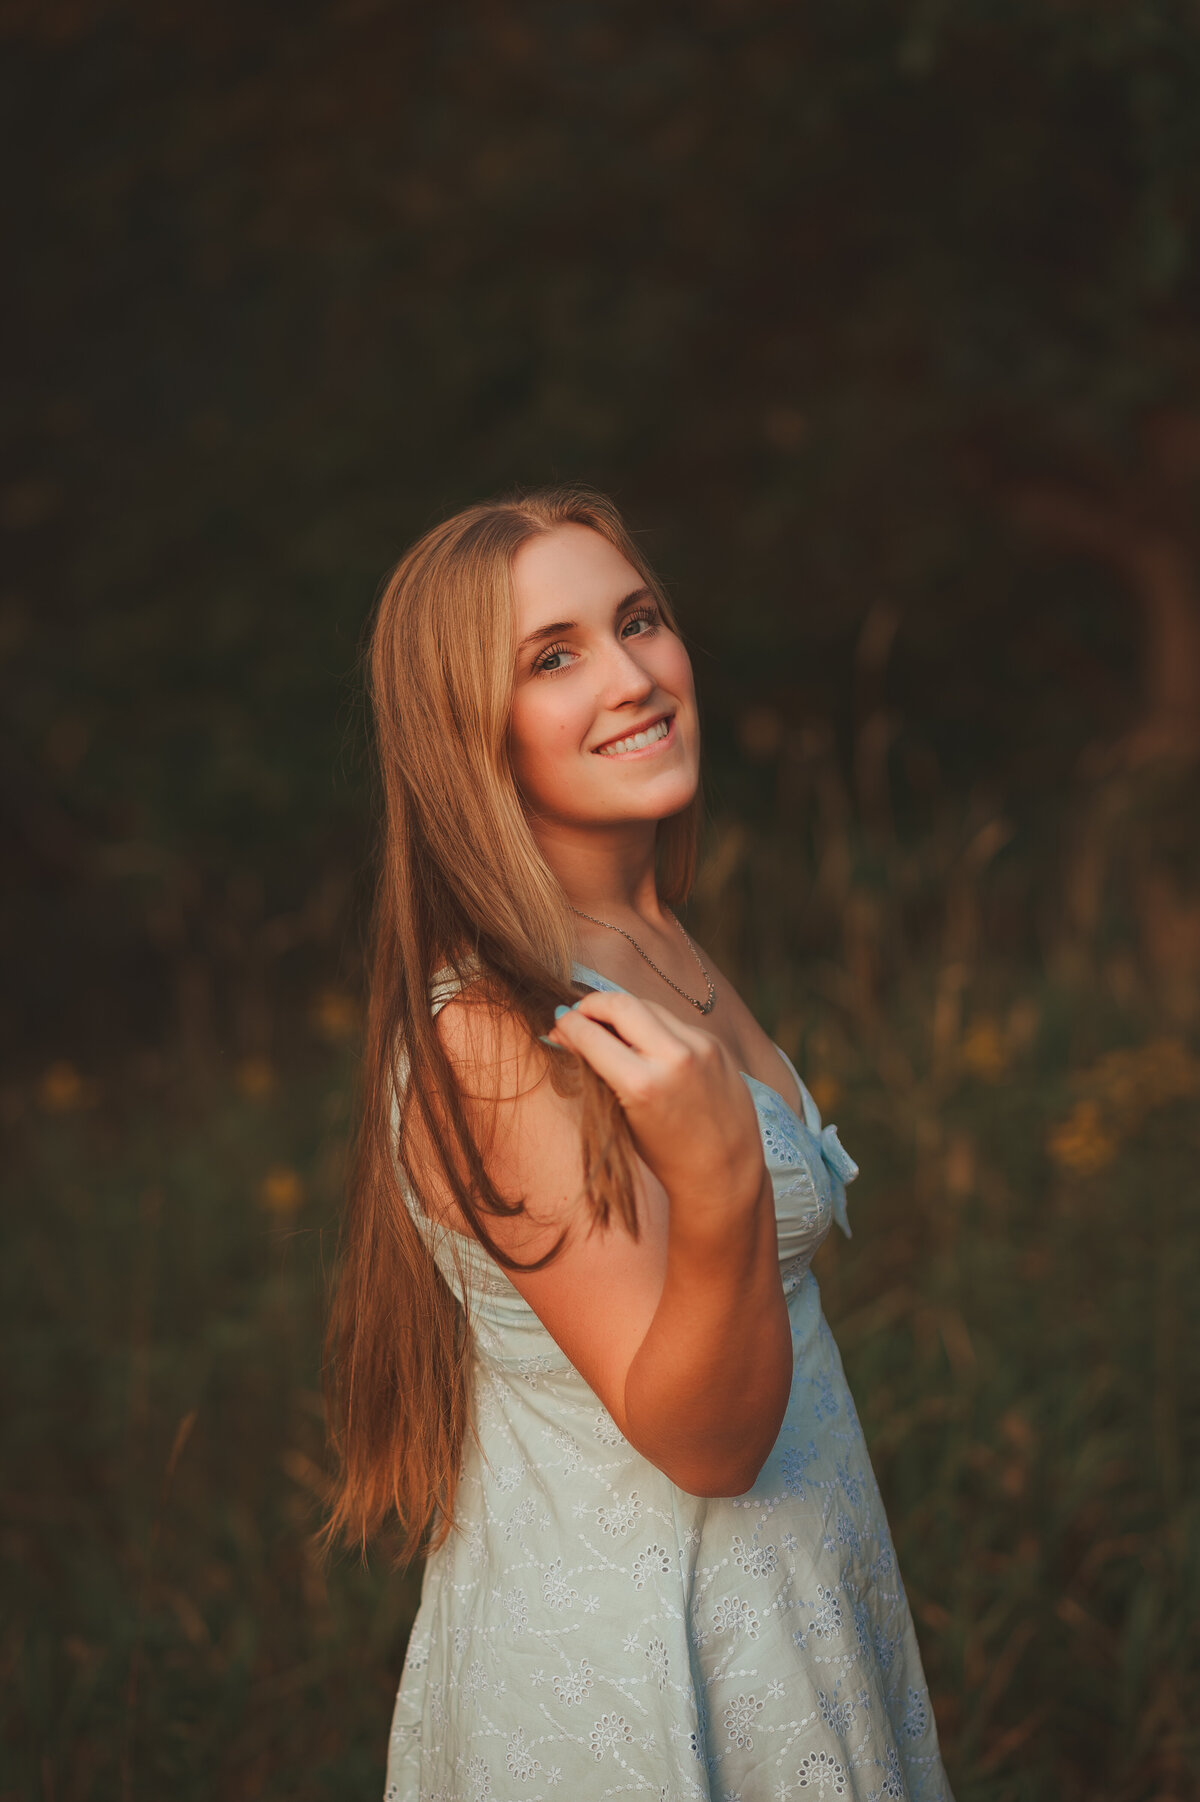 Journey into woodsy whimsy with outdoor senior portraits amidst the beauty of Woodbury. Let Shannon Kathleen Photography frame your memories in the enchantment of nature. Reserve your session now.